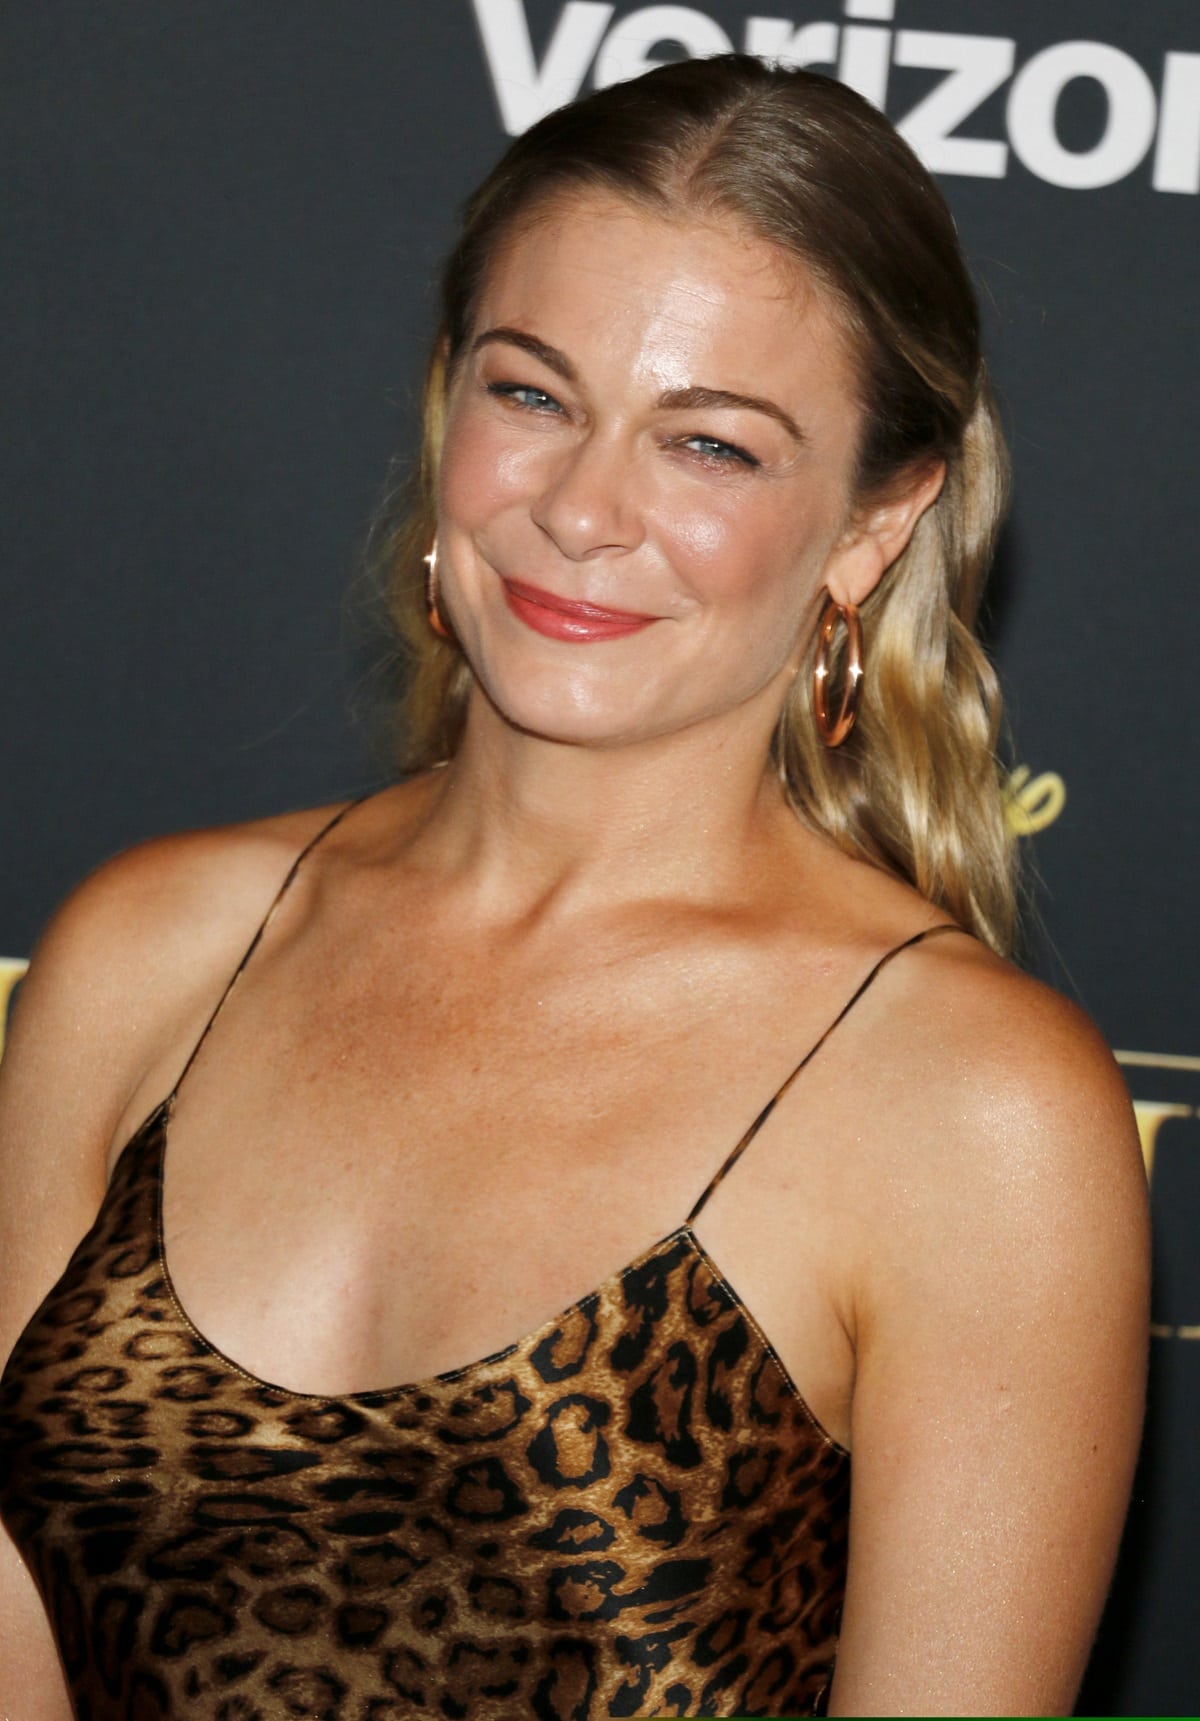 LeAnn Rimes proudly embraces her rich heritage, with roots tracing back to both English and German ancestry